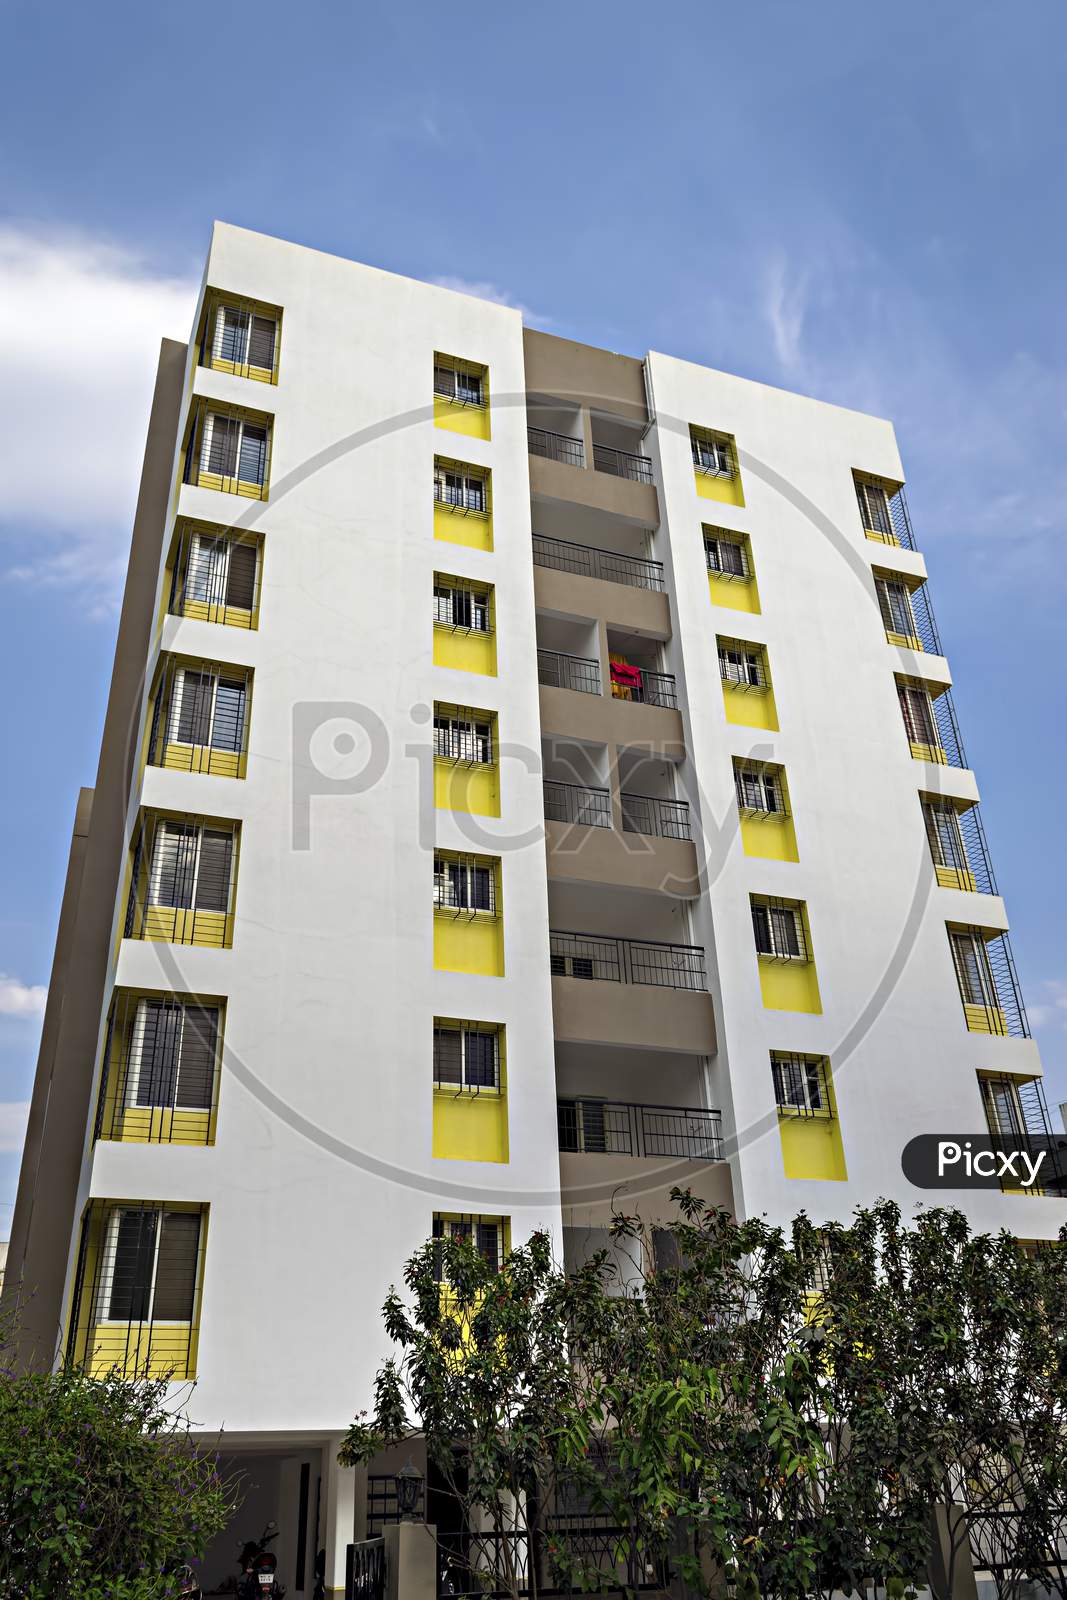 Modern multi-storied residential building with nice beautiful blue sky background.